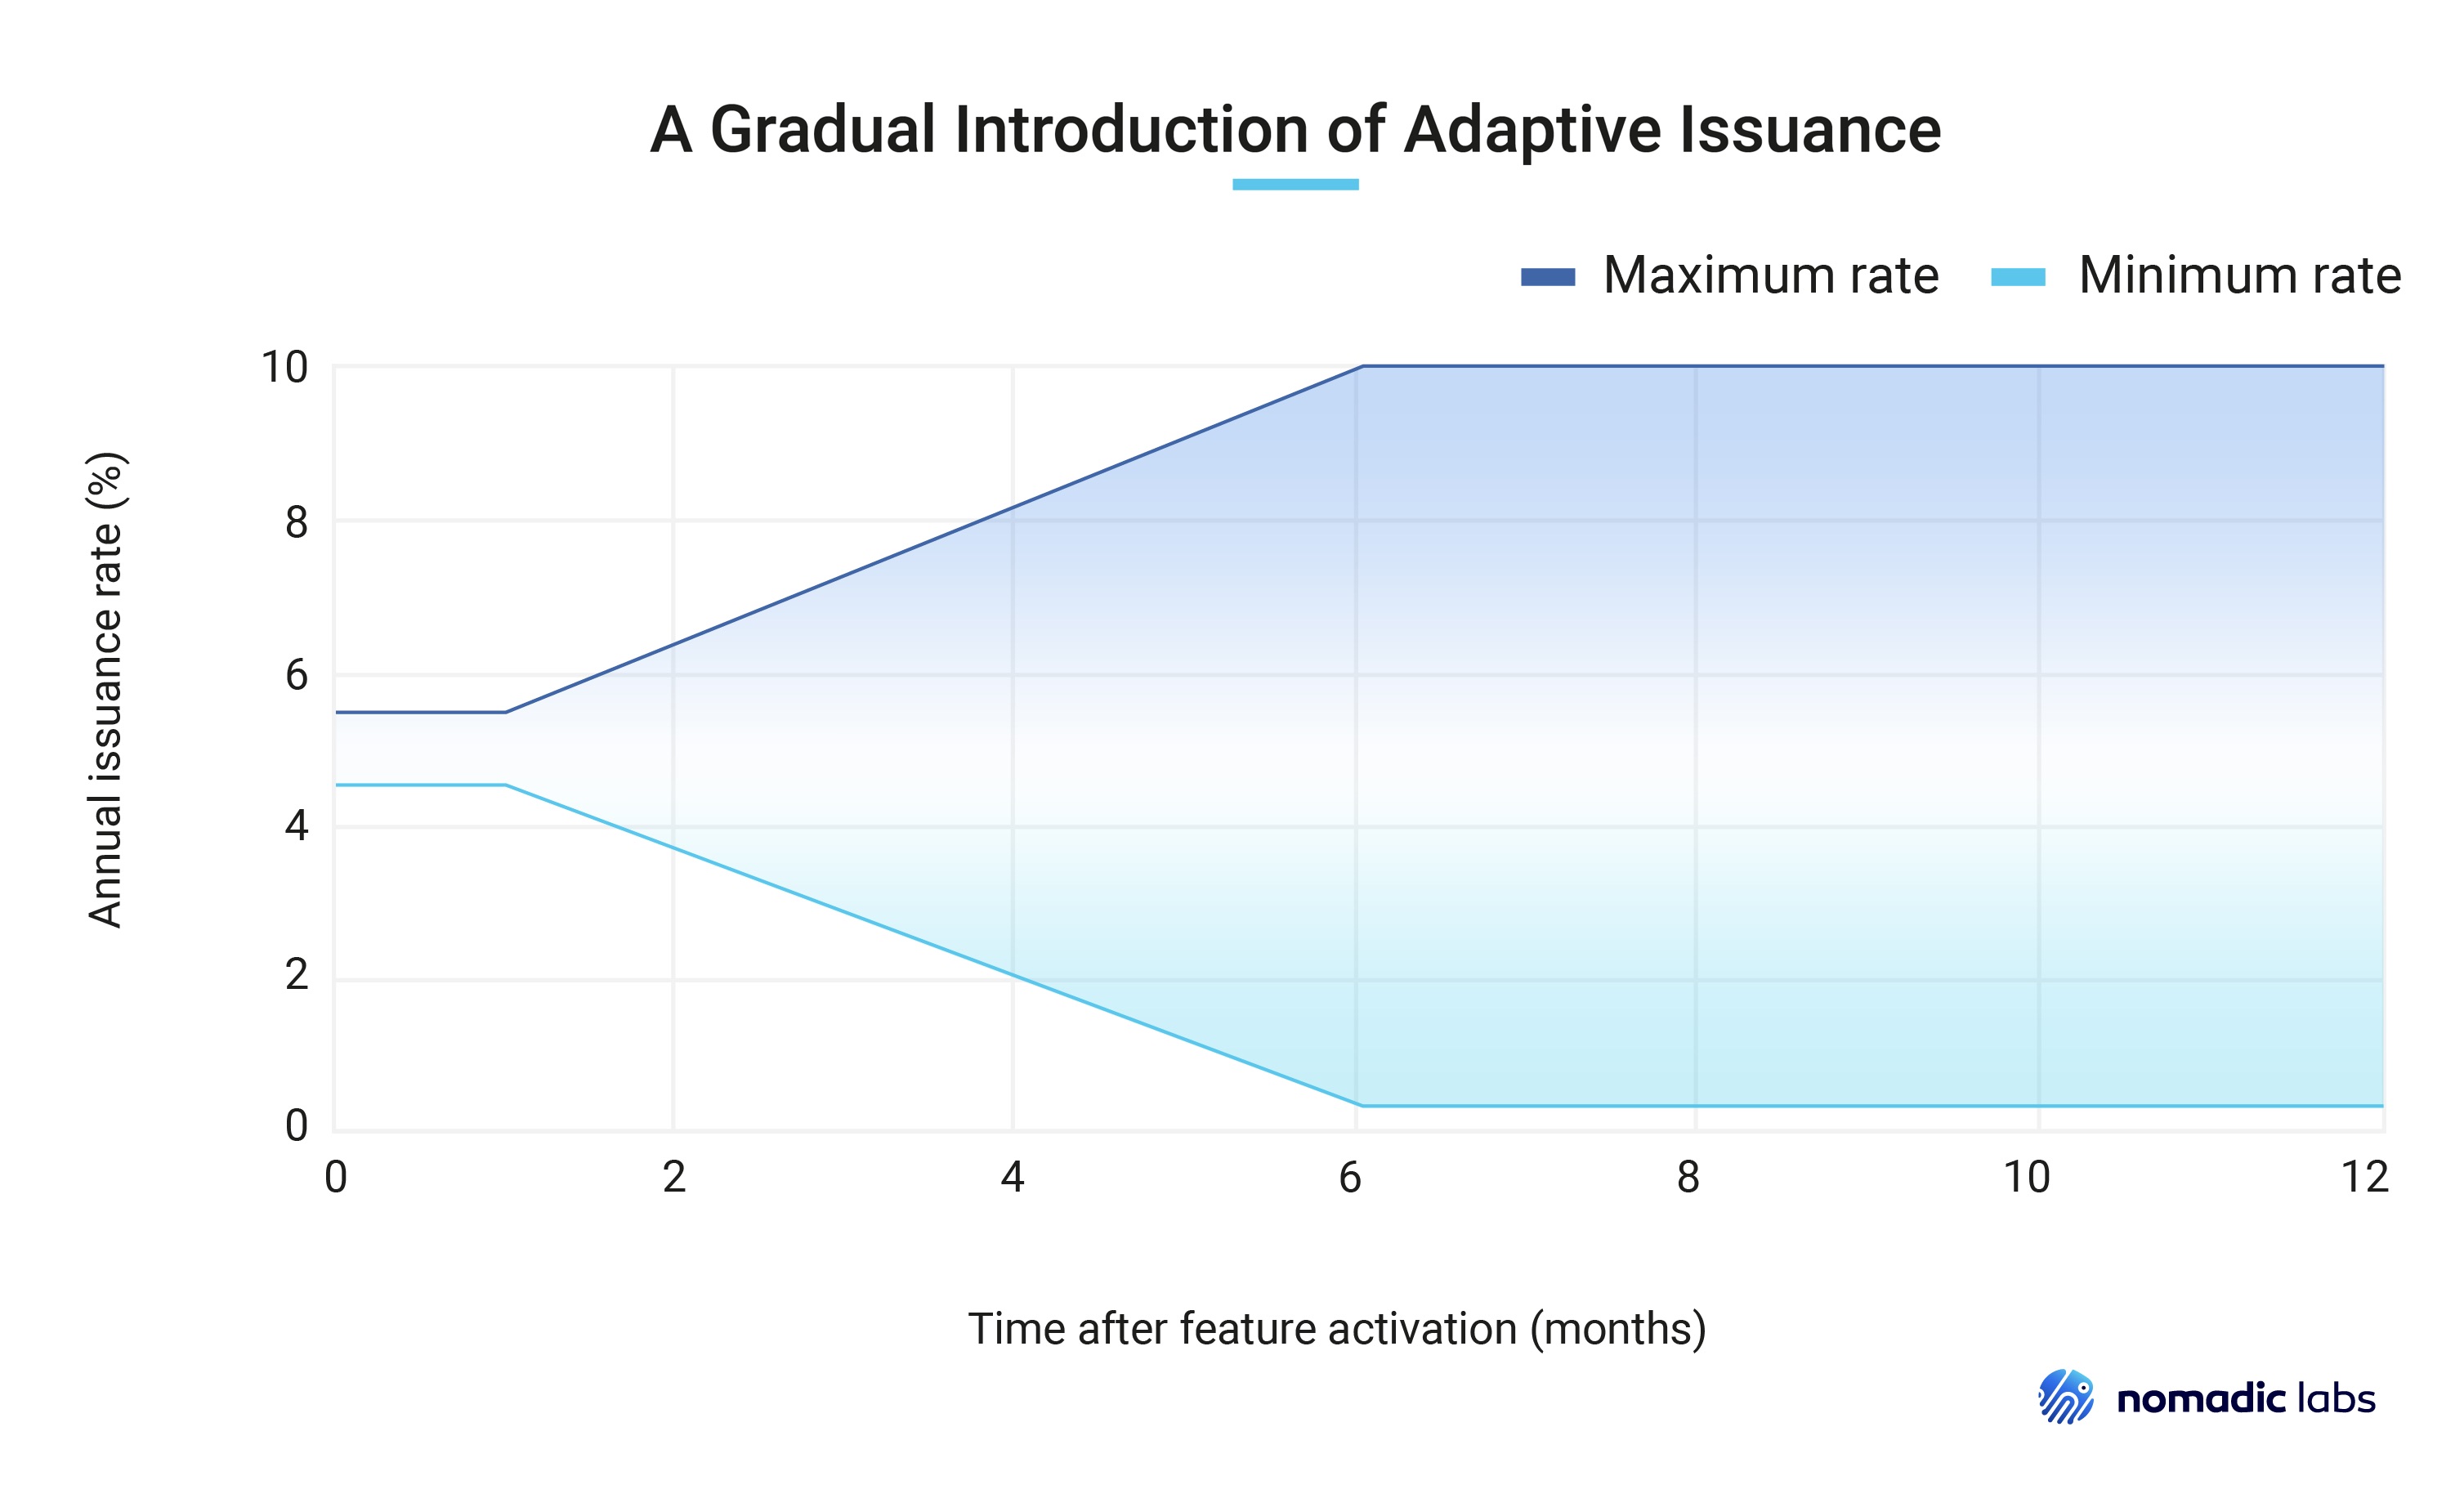 Image showing a gradual widening of the issuance rate span